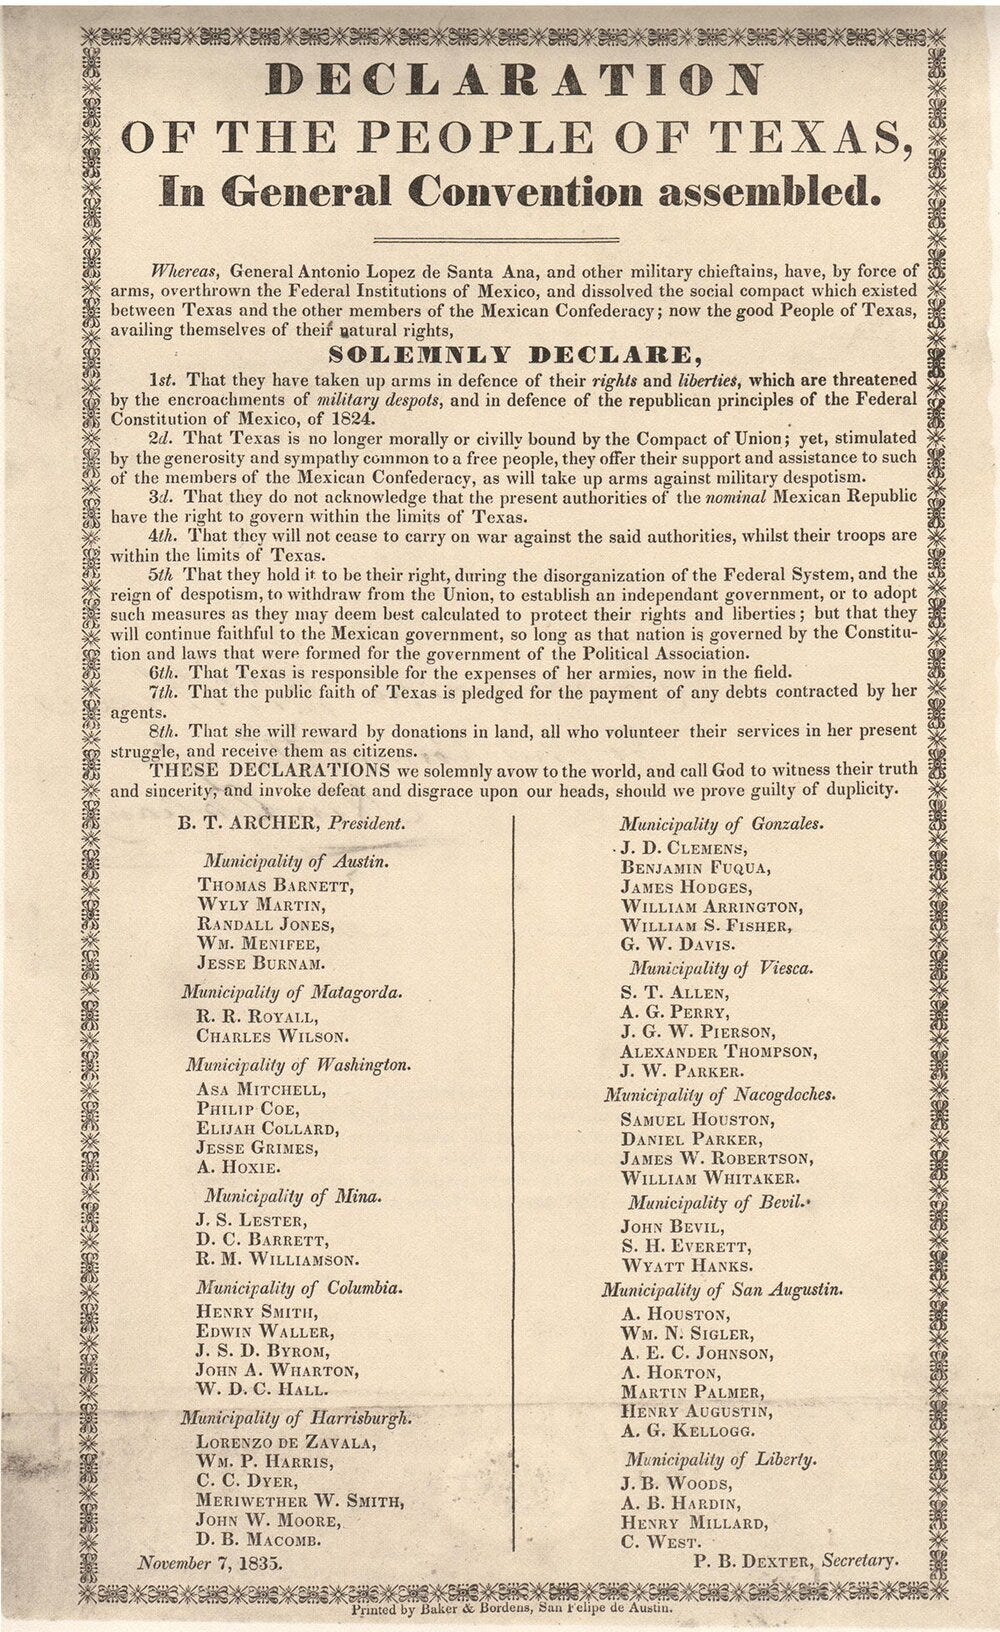 November 7, 1835, Declaration of the People of Texas